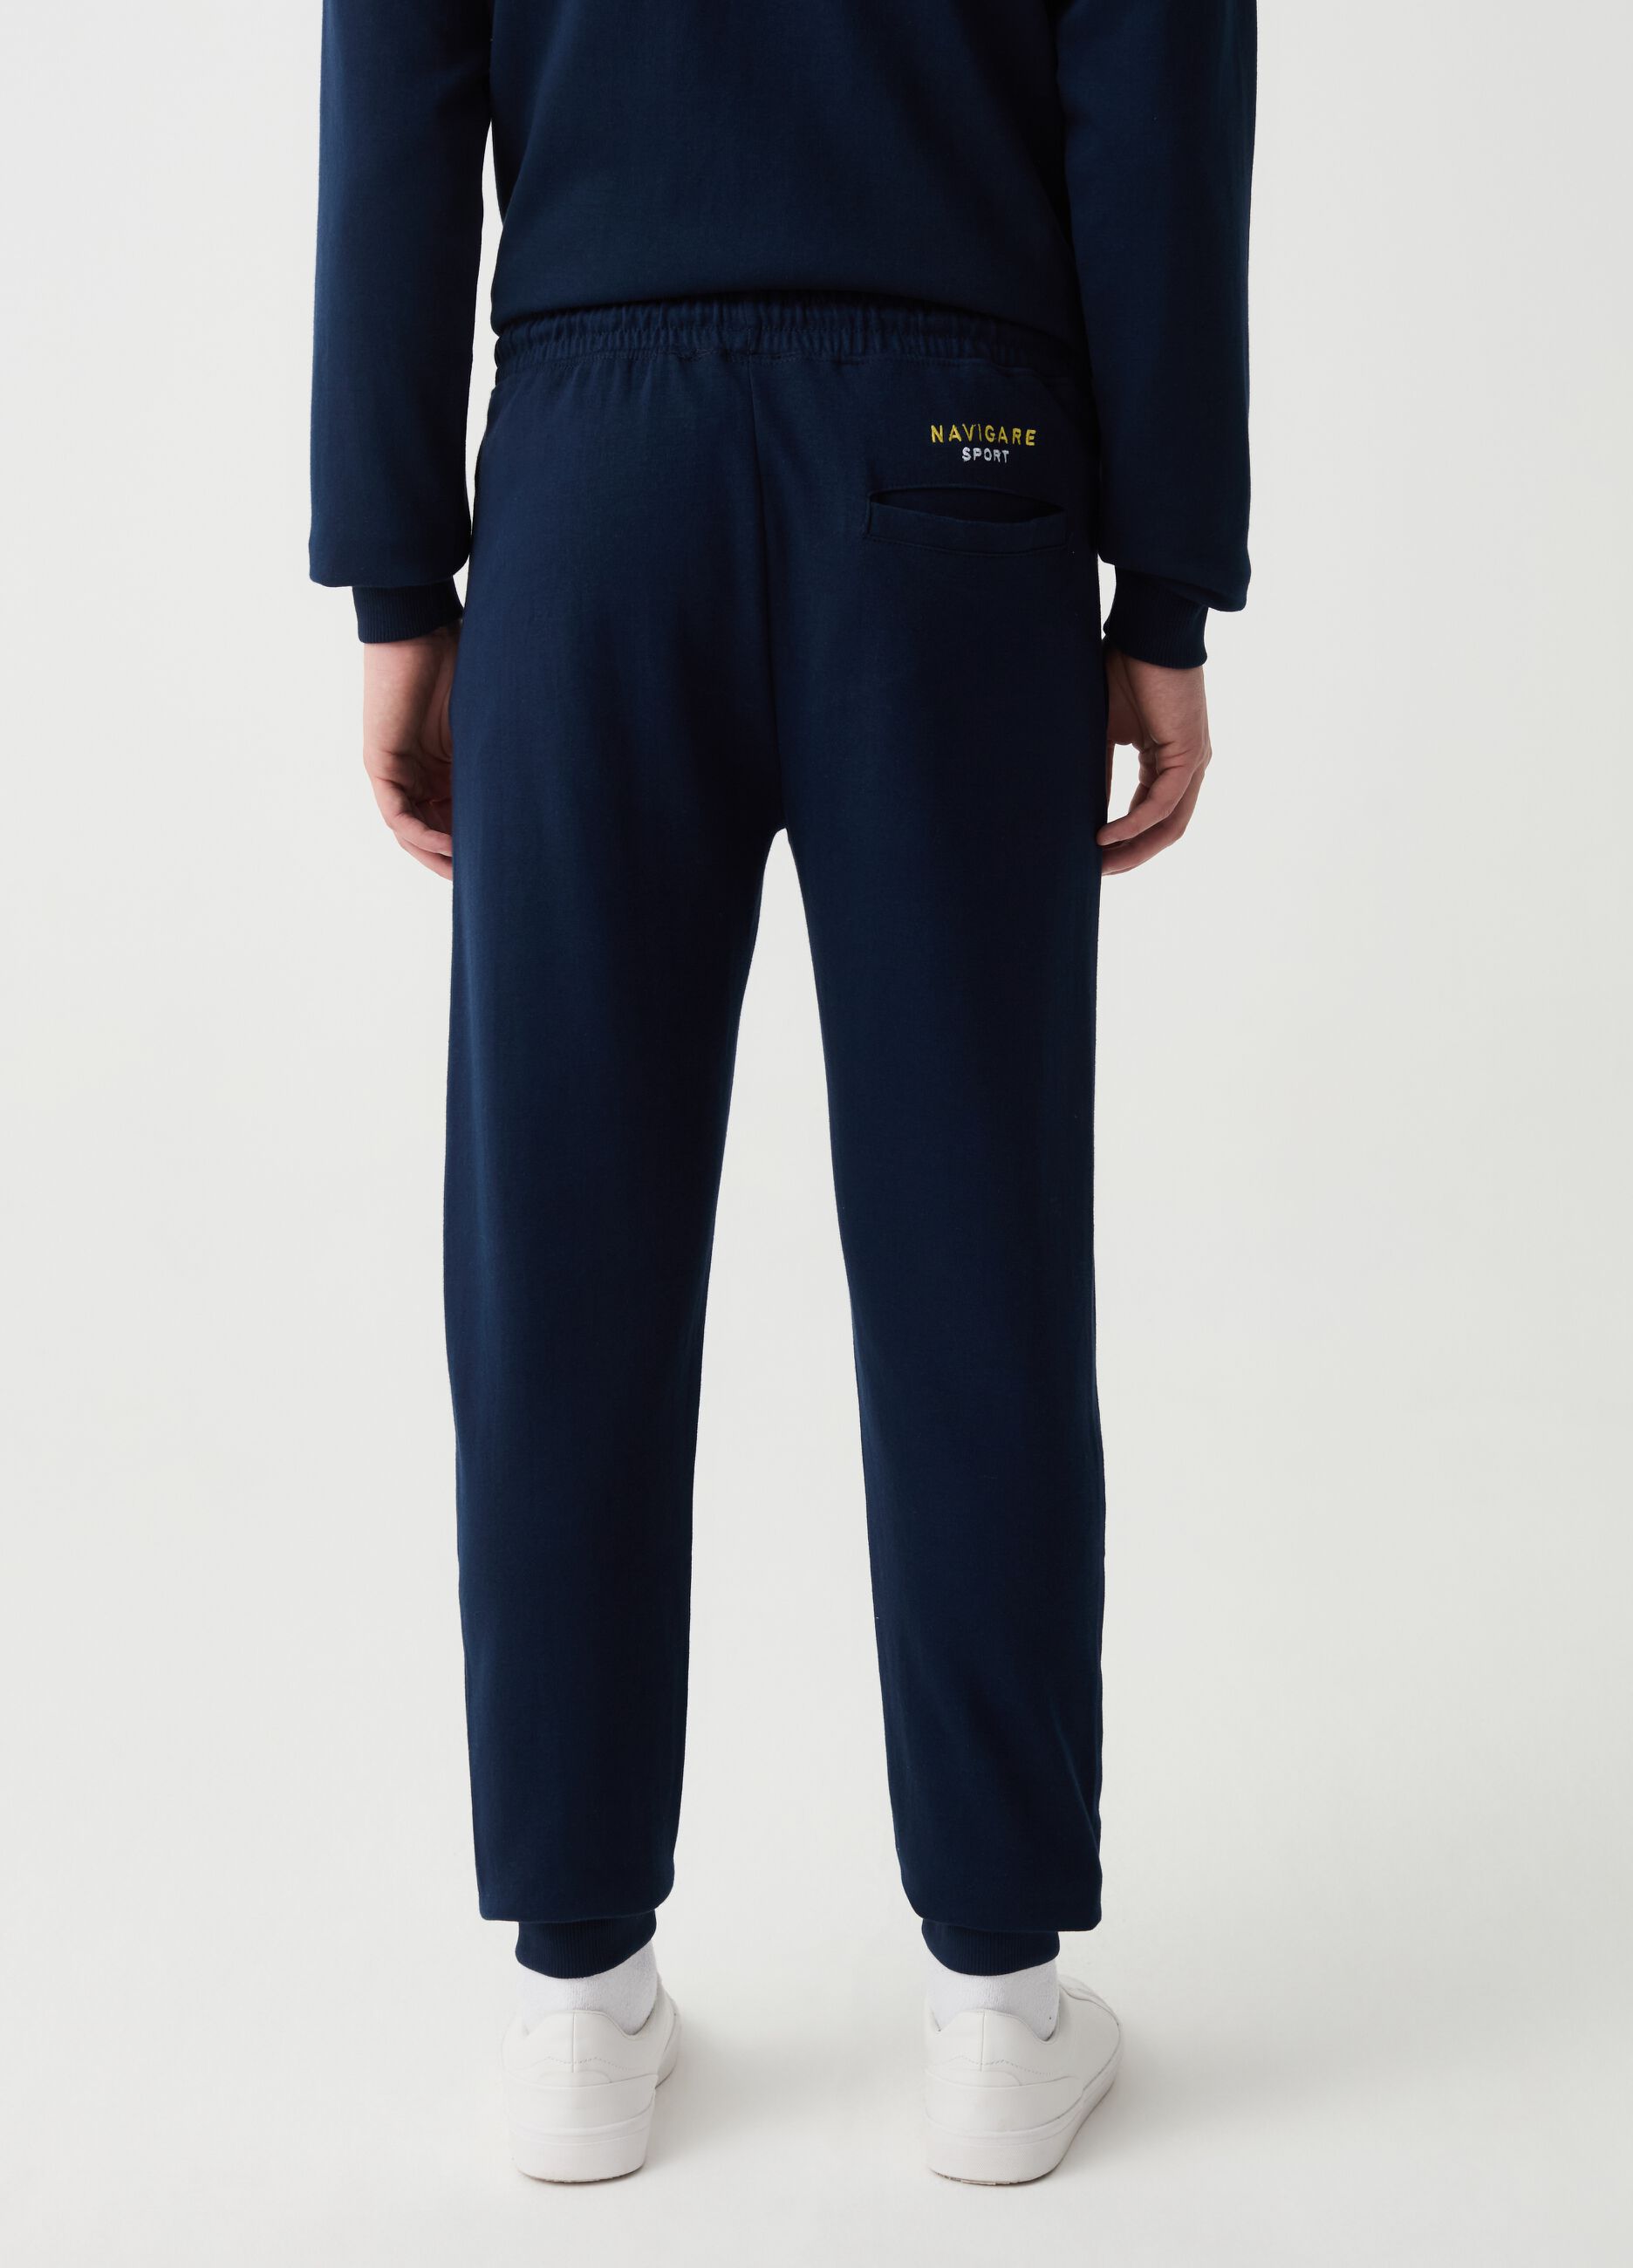 Navigare Sport joggers with embroidery and patch